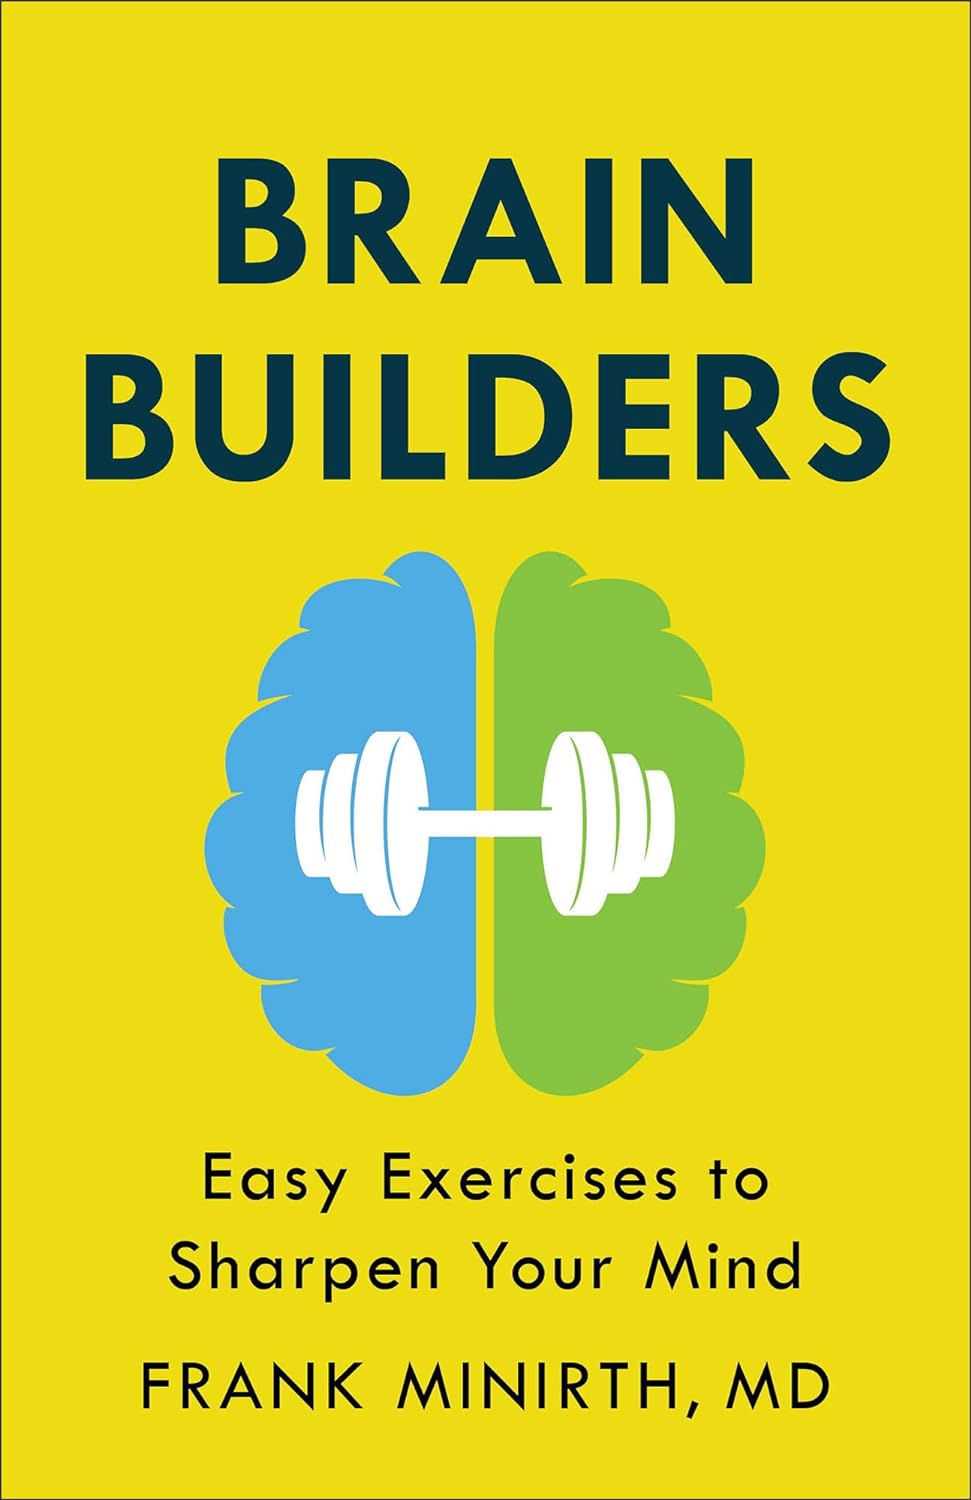 Brain Builders Easy Exercises to Sharpen Your Mind (Repackaged) - SureShot Books Publishing LLC